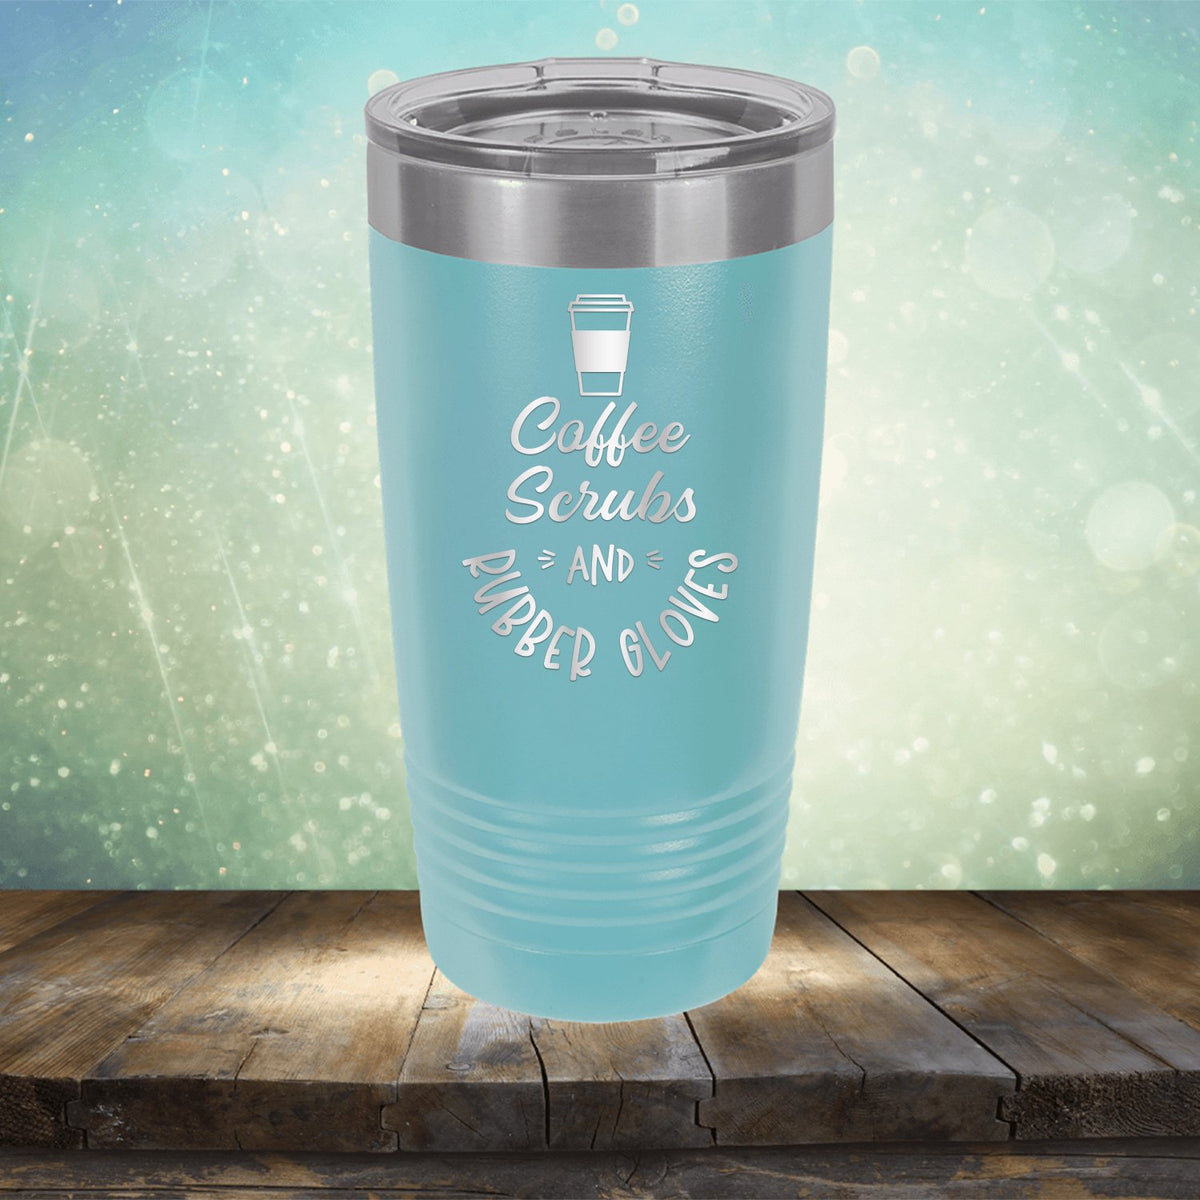 Ask Your Mom with Mustache - Laser Etched Tumbler Mug